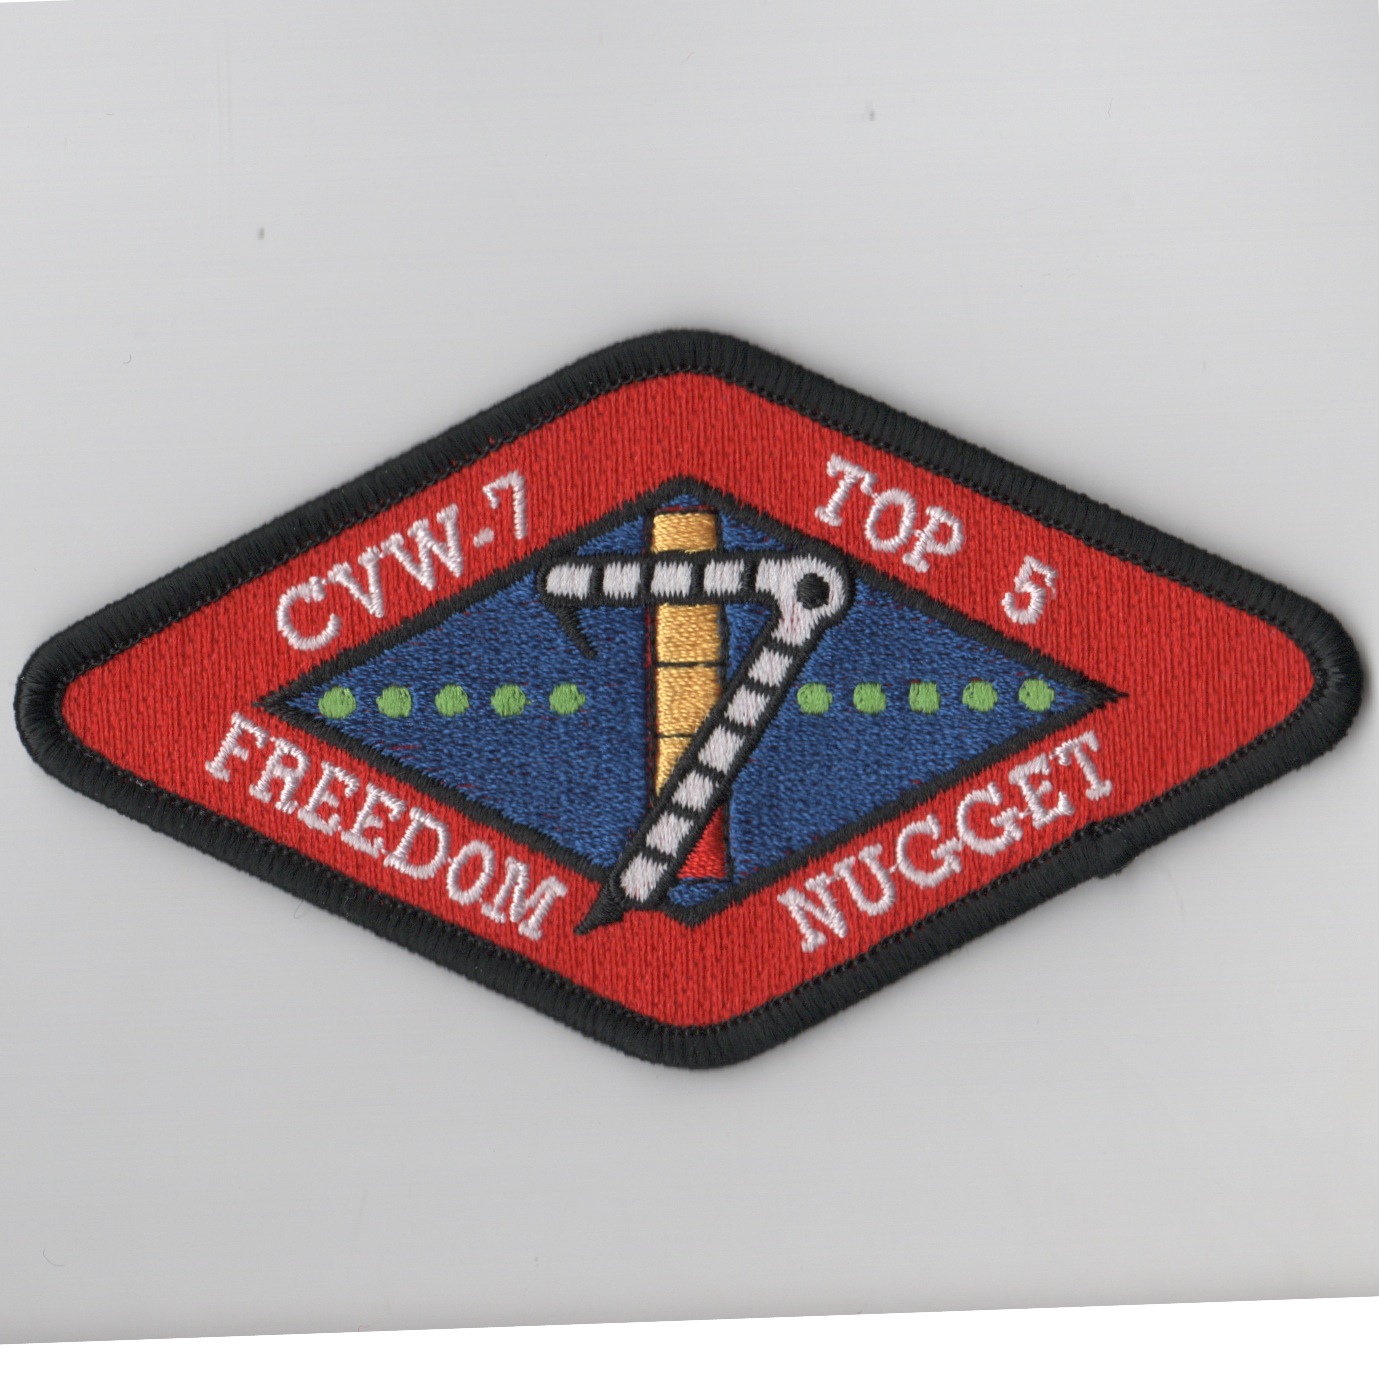 CVW-7 'TOP 5 NUGGET' Patch